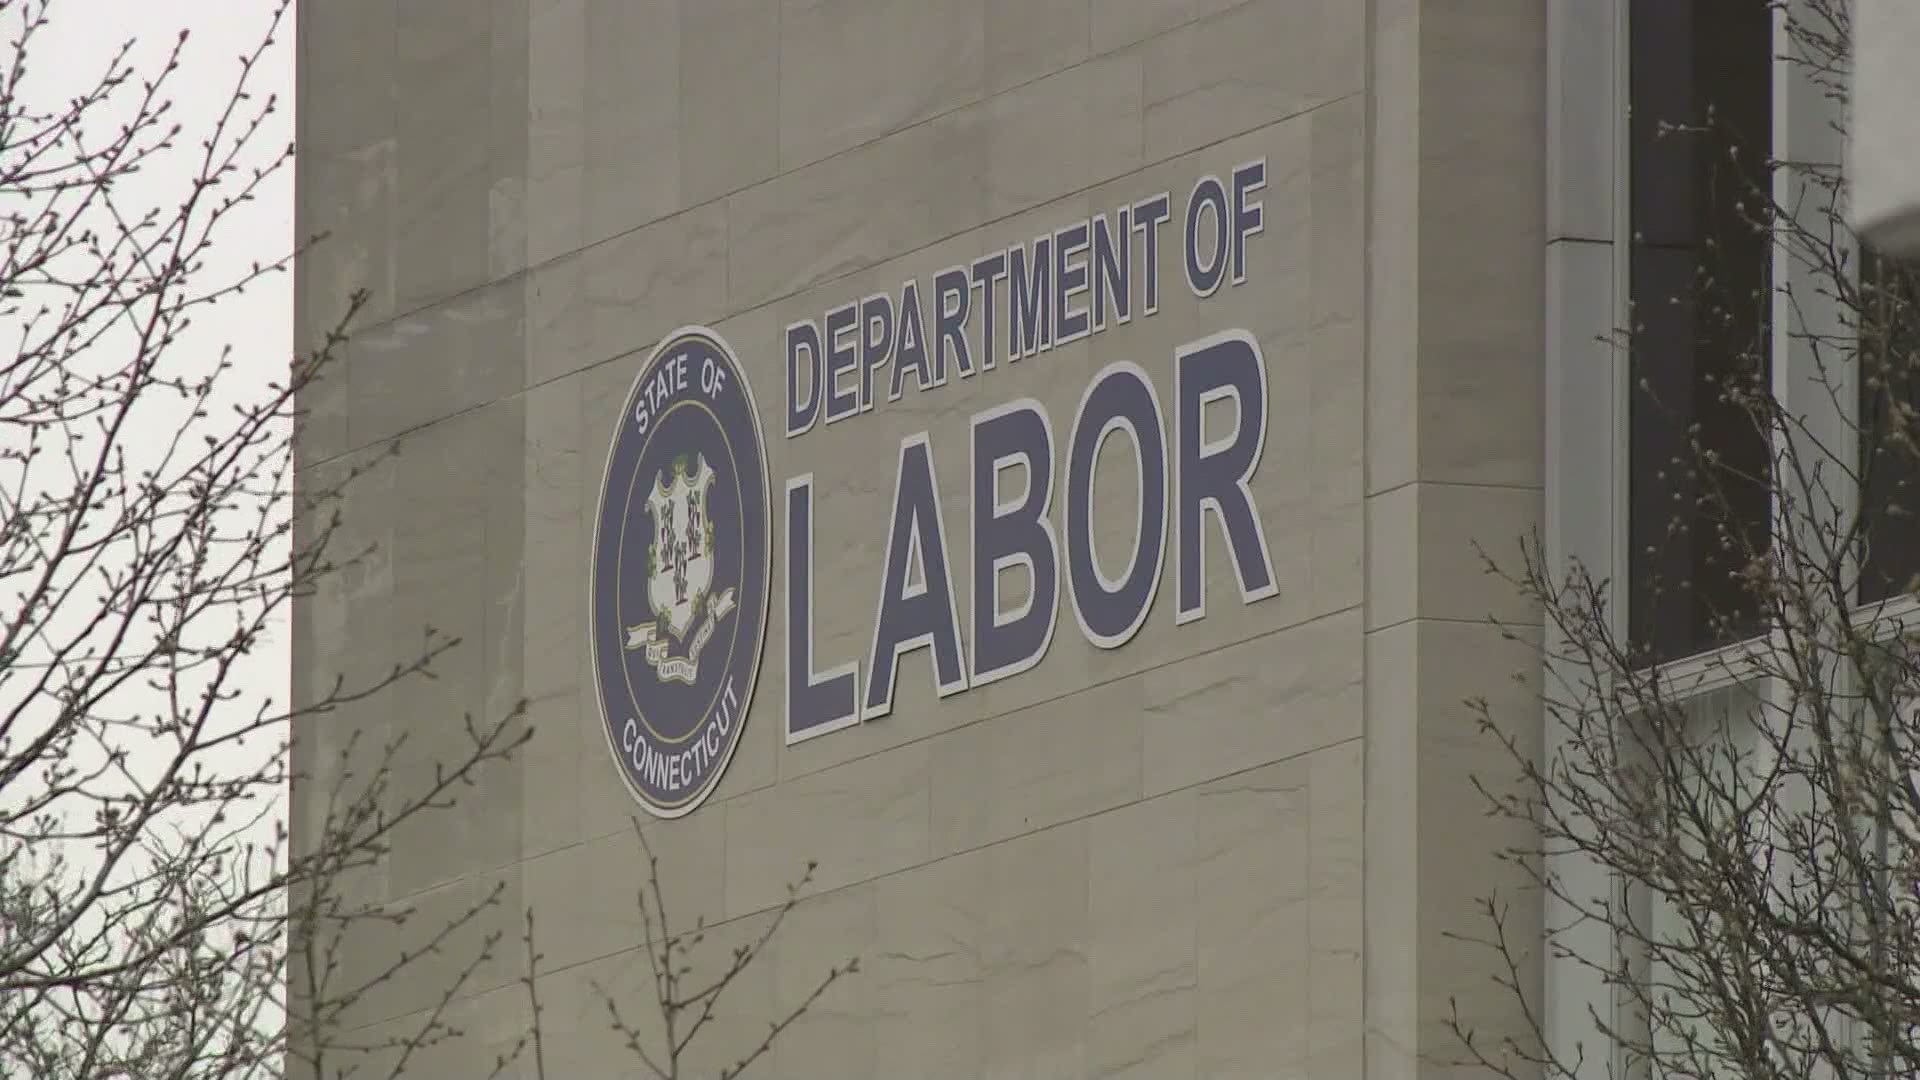 The Department of Labor told FOX61 last week that the Pandemic Unemployment Assistance button would be available this week.